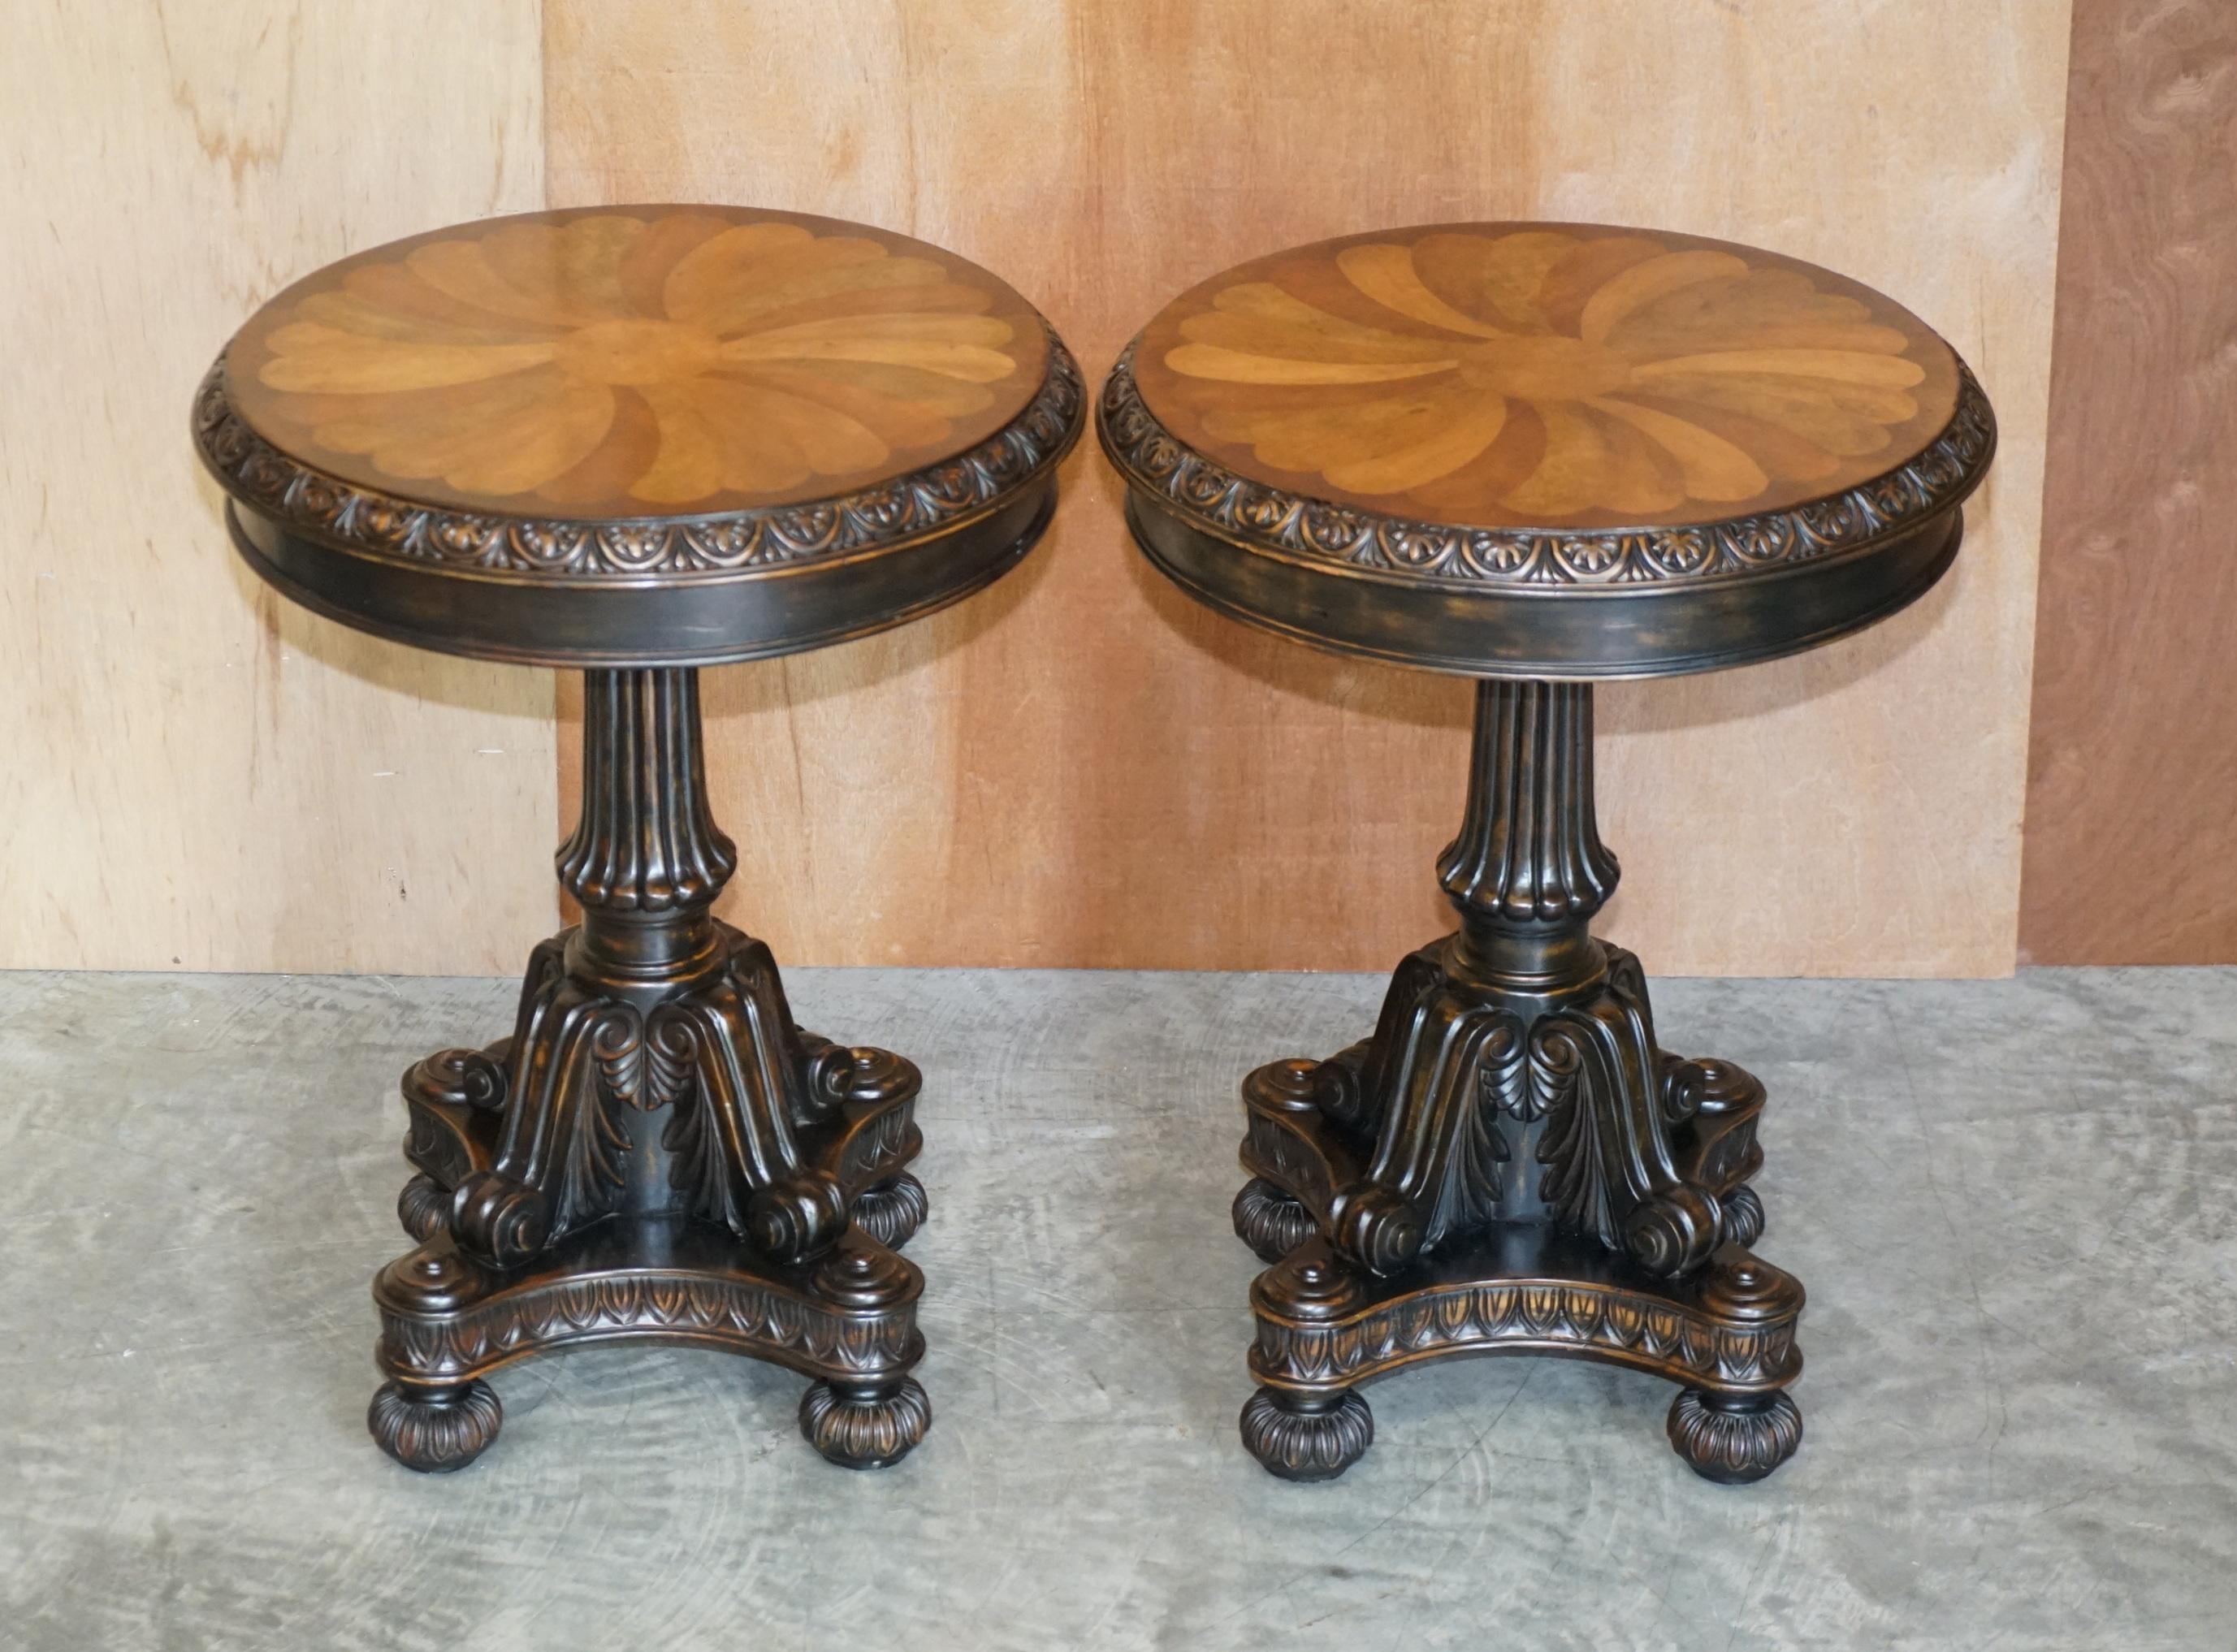 We are delighted to offer for sale this stunning pair of antique style Sample / specimen hardwood side tables.

A very good looking decorative and well made pair of tables, the tops are what’s called specimen hardwood, they are made up of